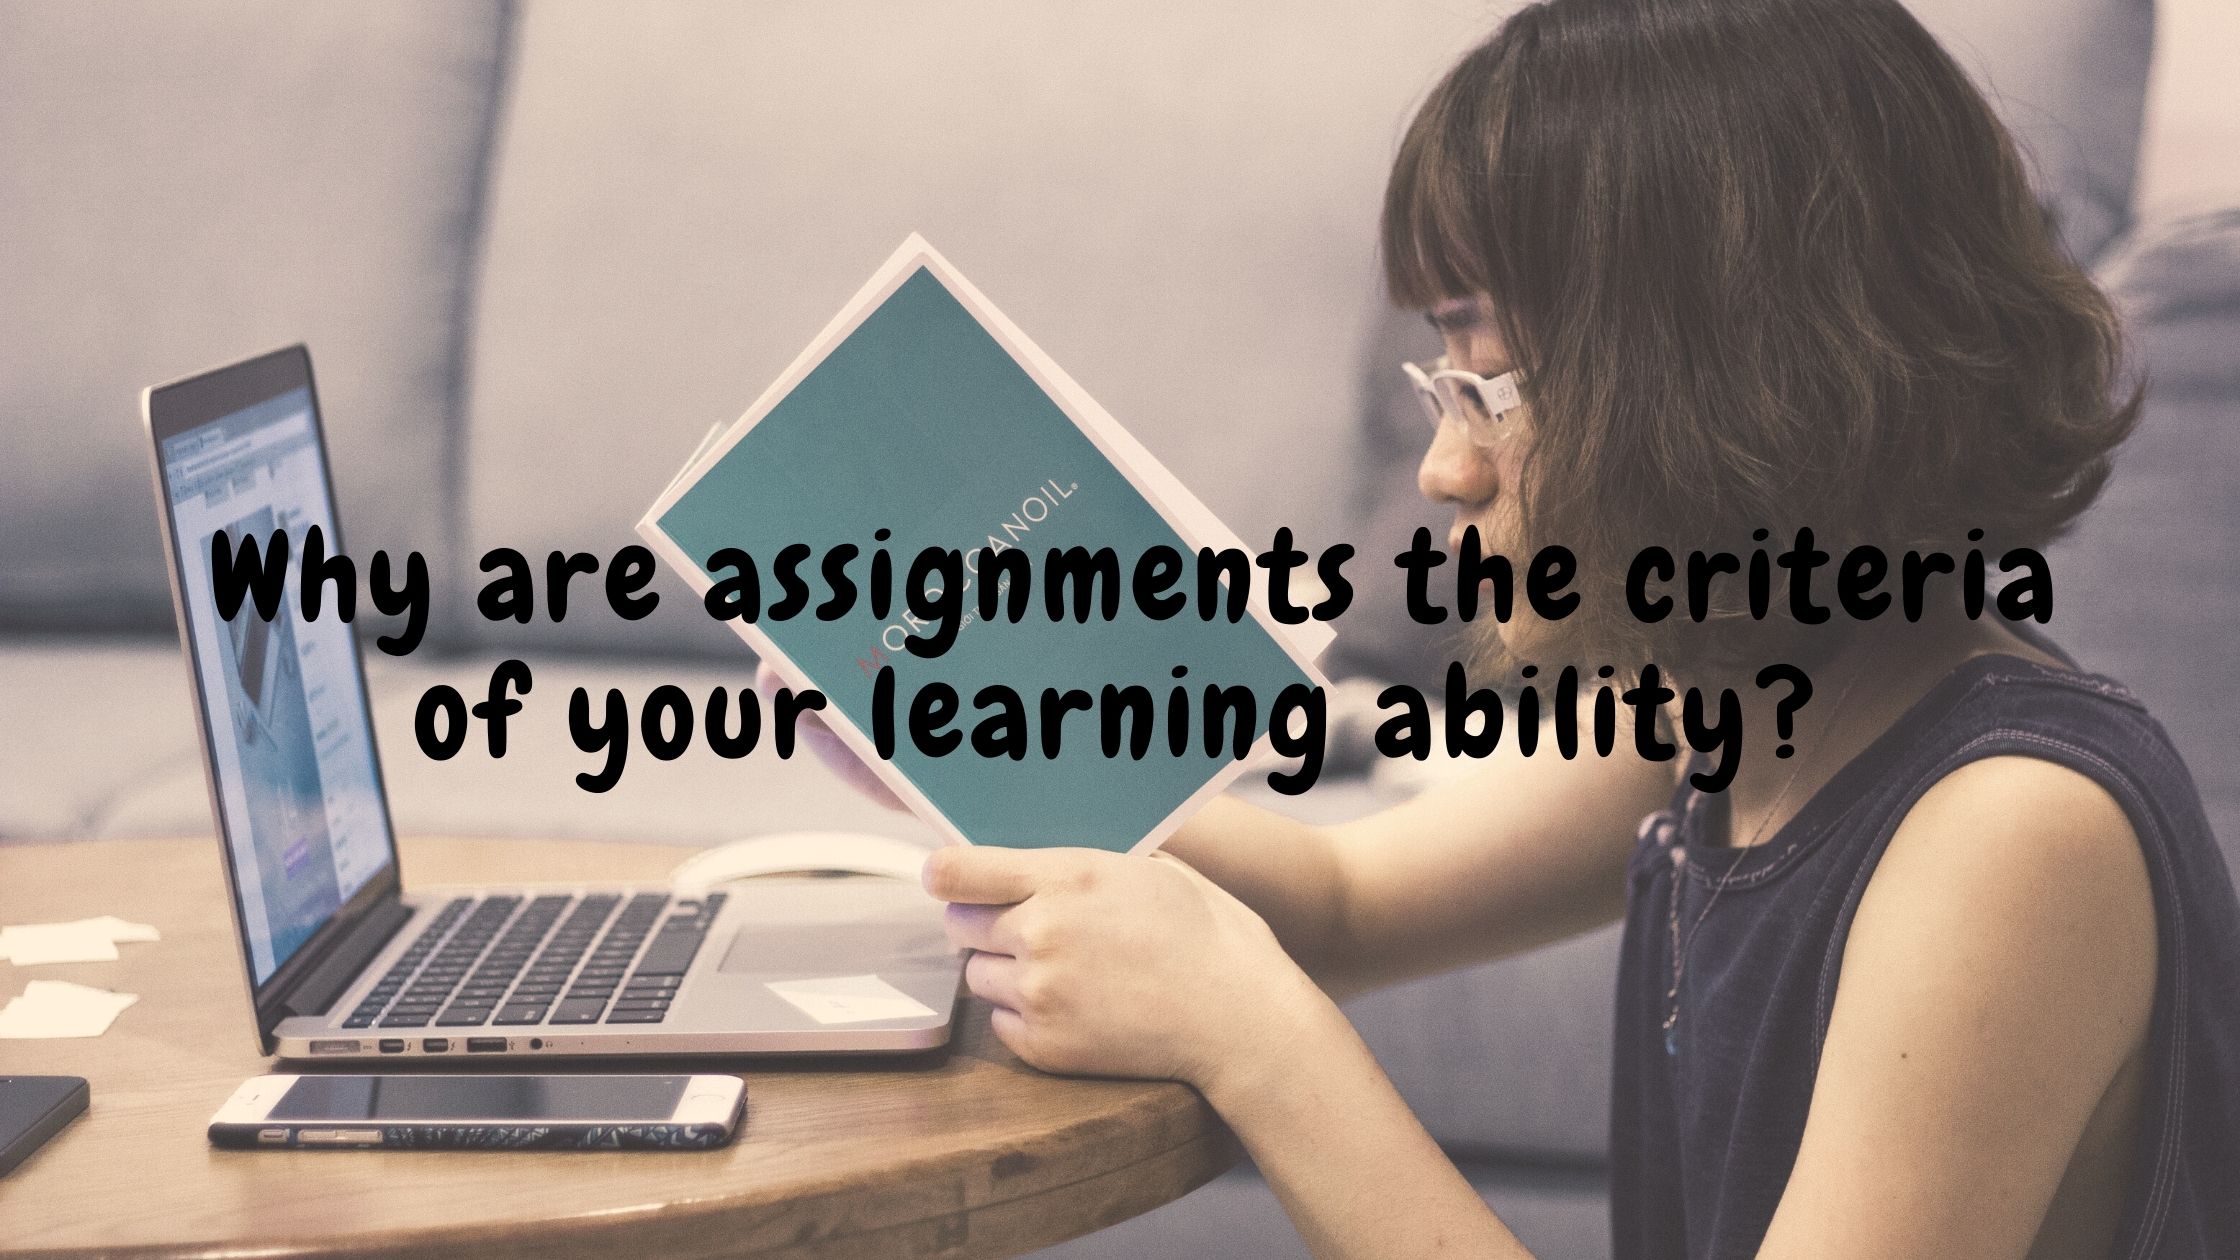 Why are assignments the criteria of your learning ability?